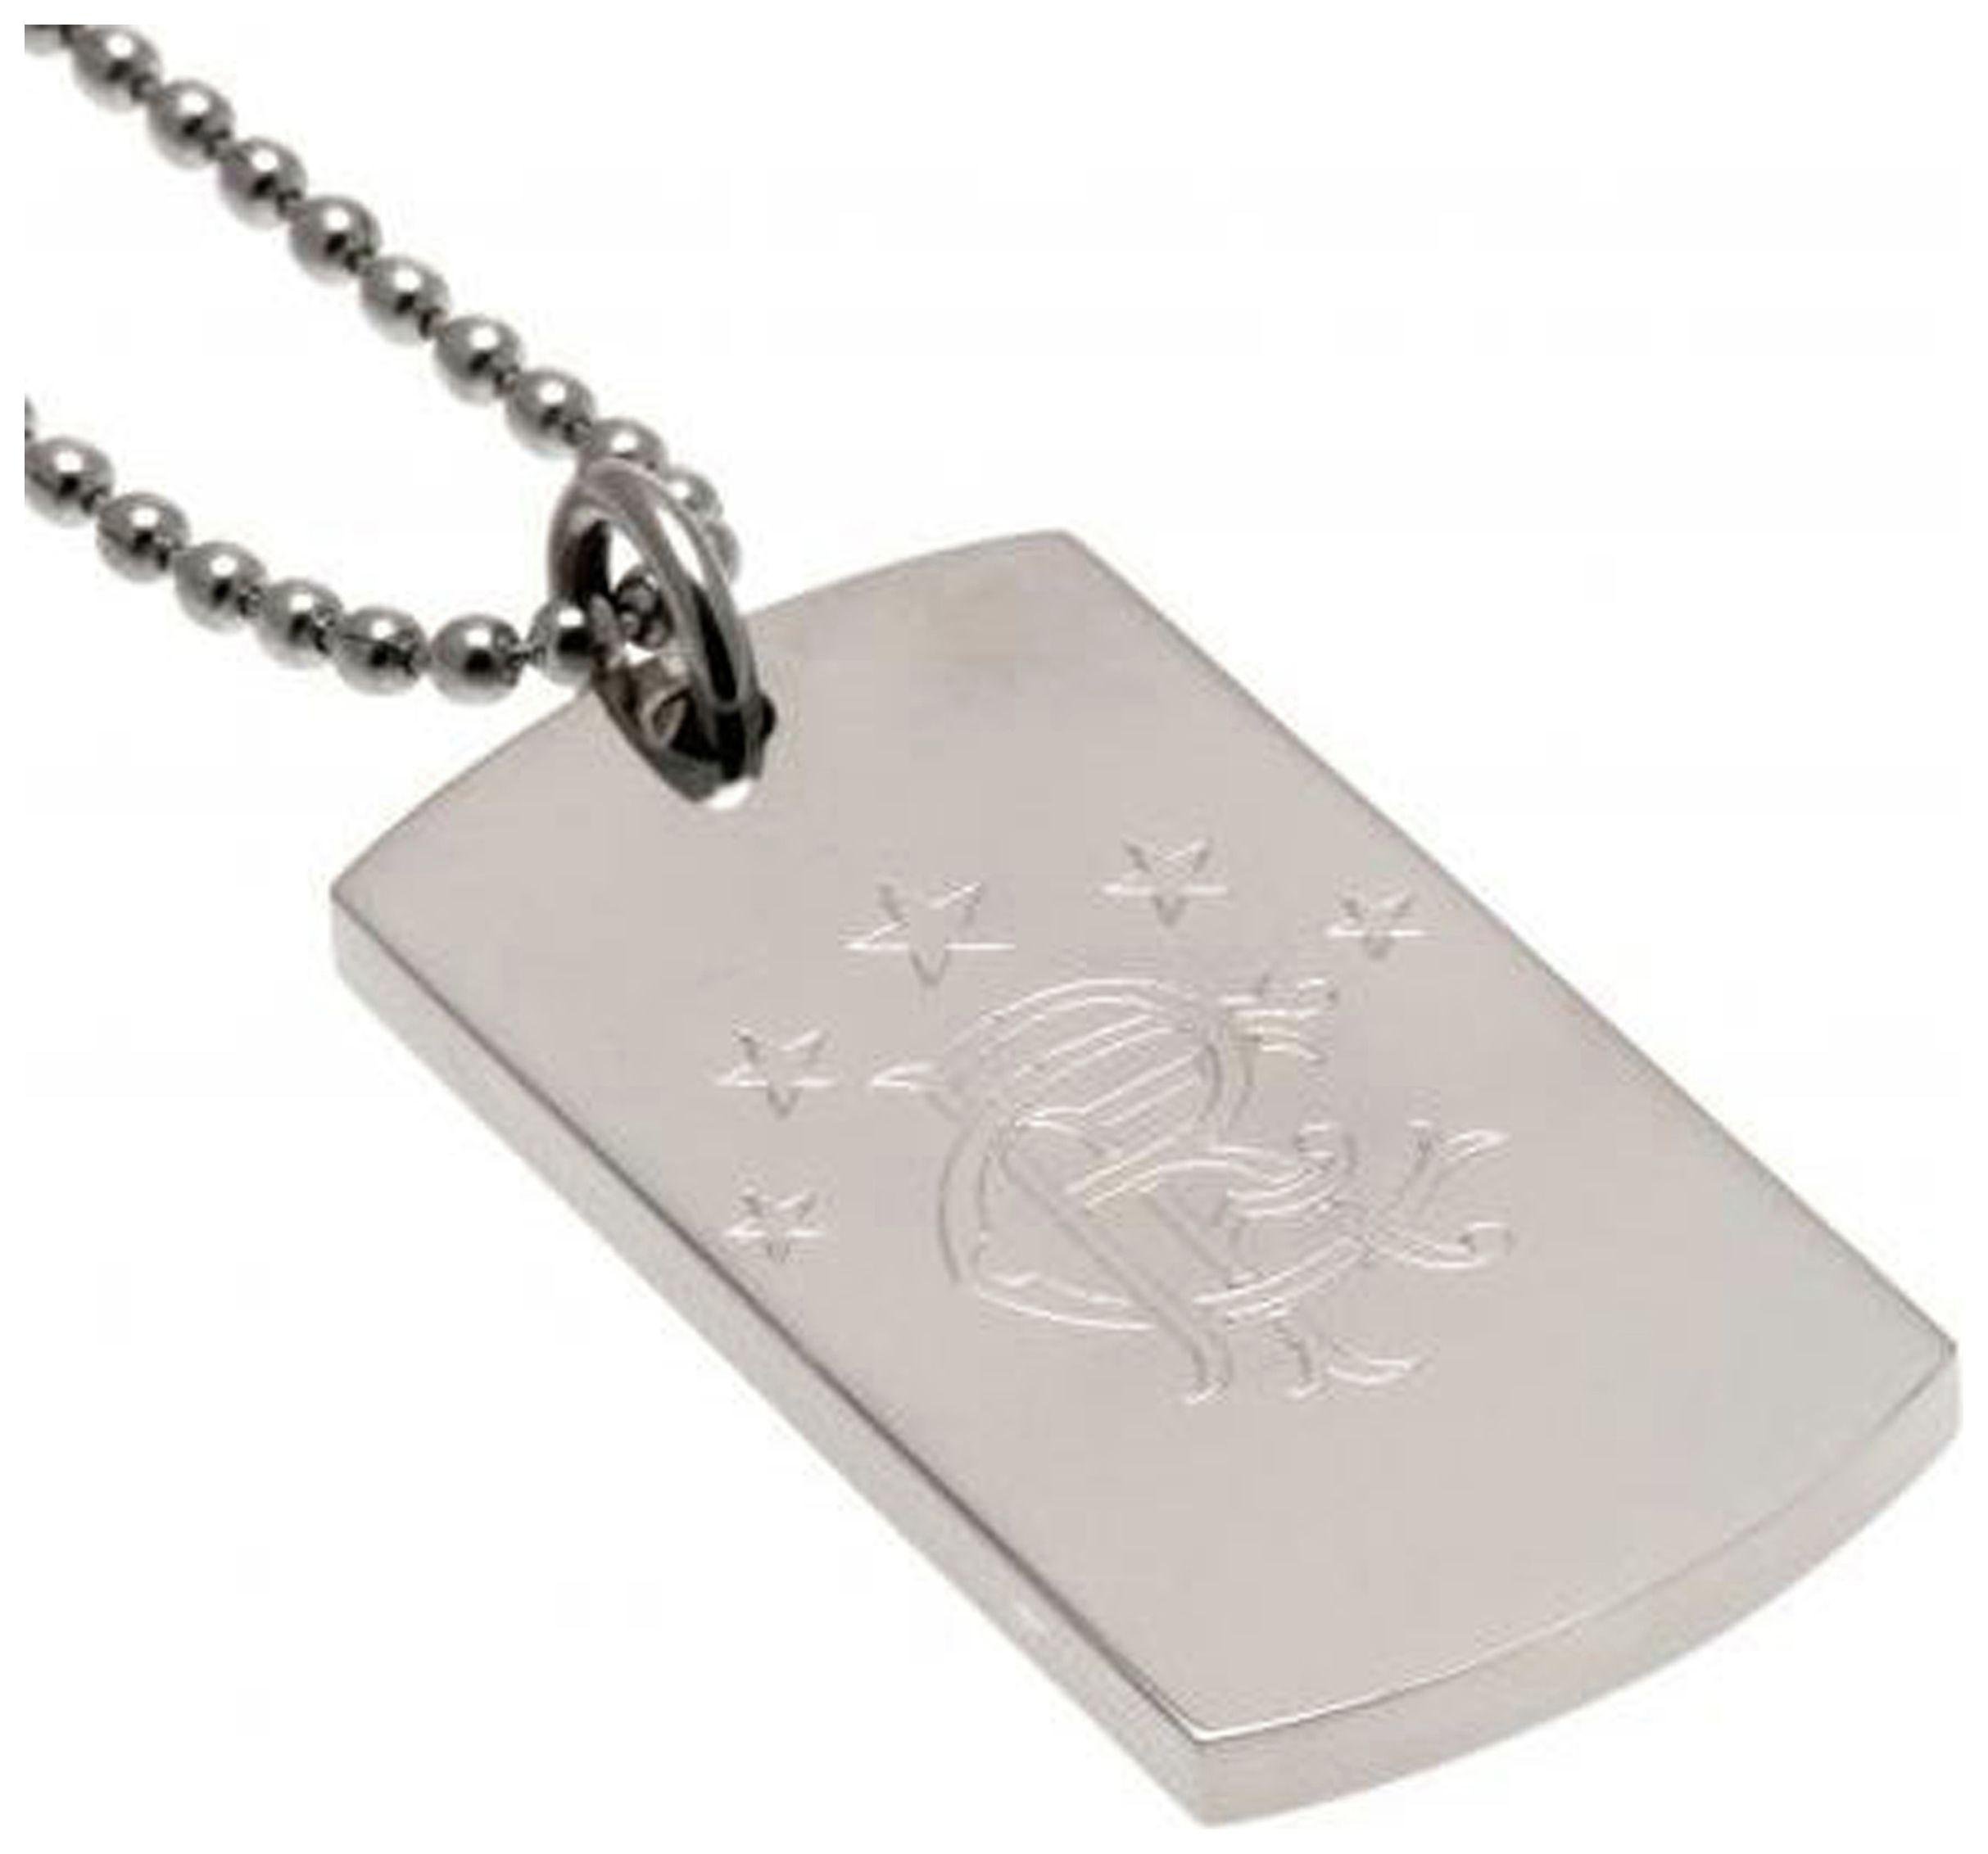 Stainless Steel Rangers Dogtag and Chain.